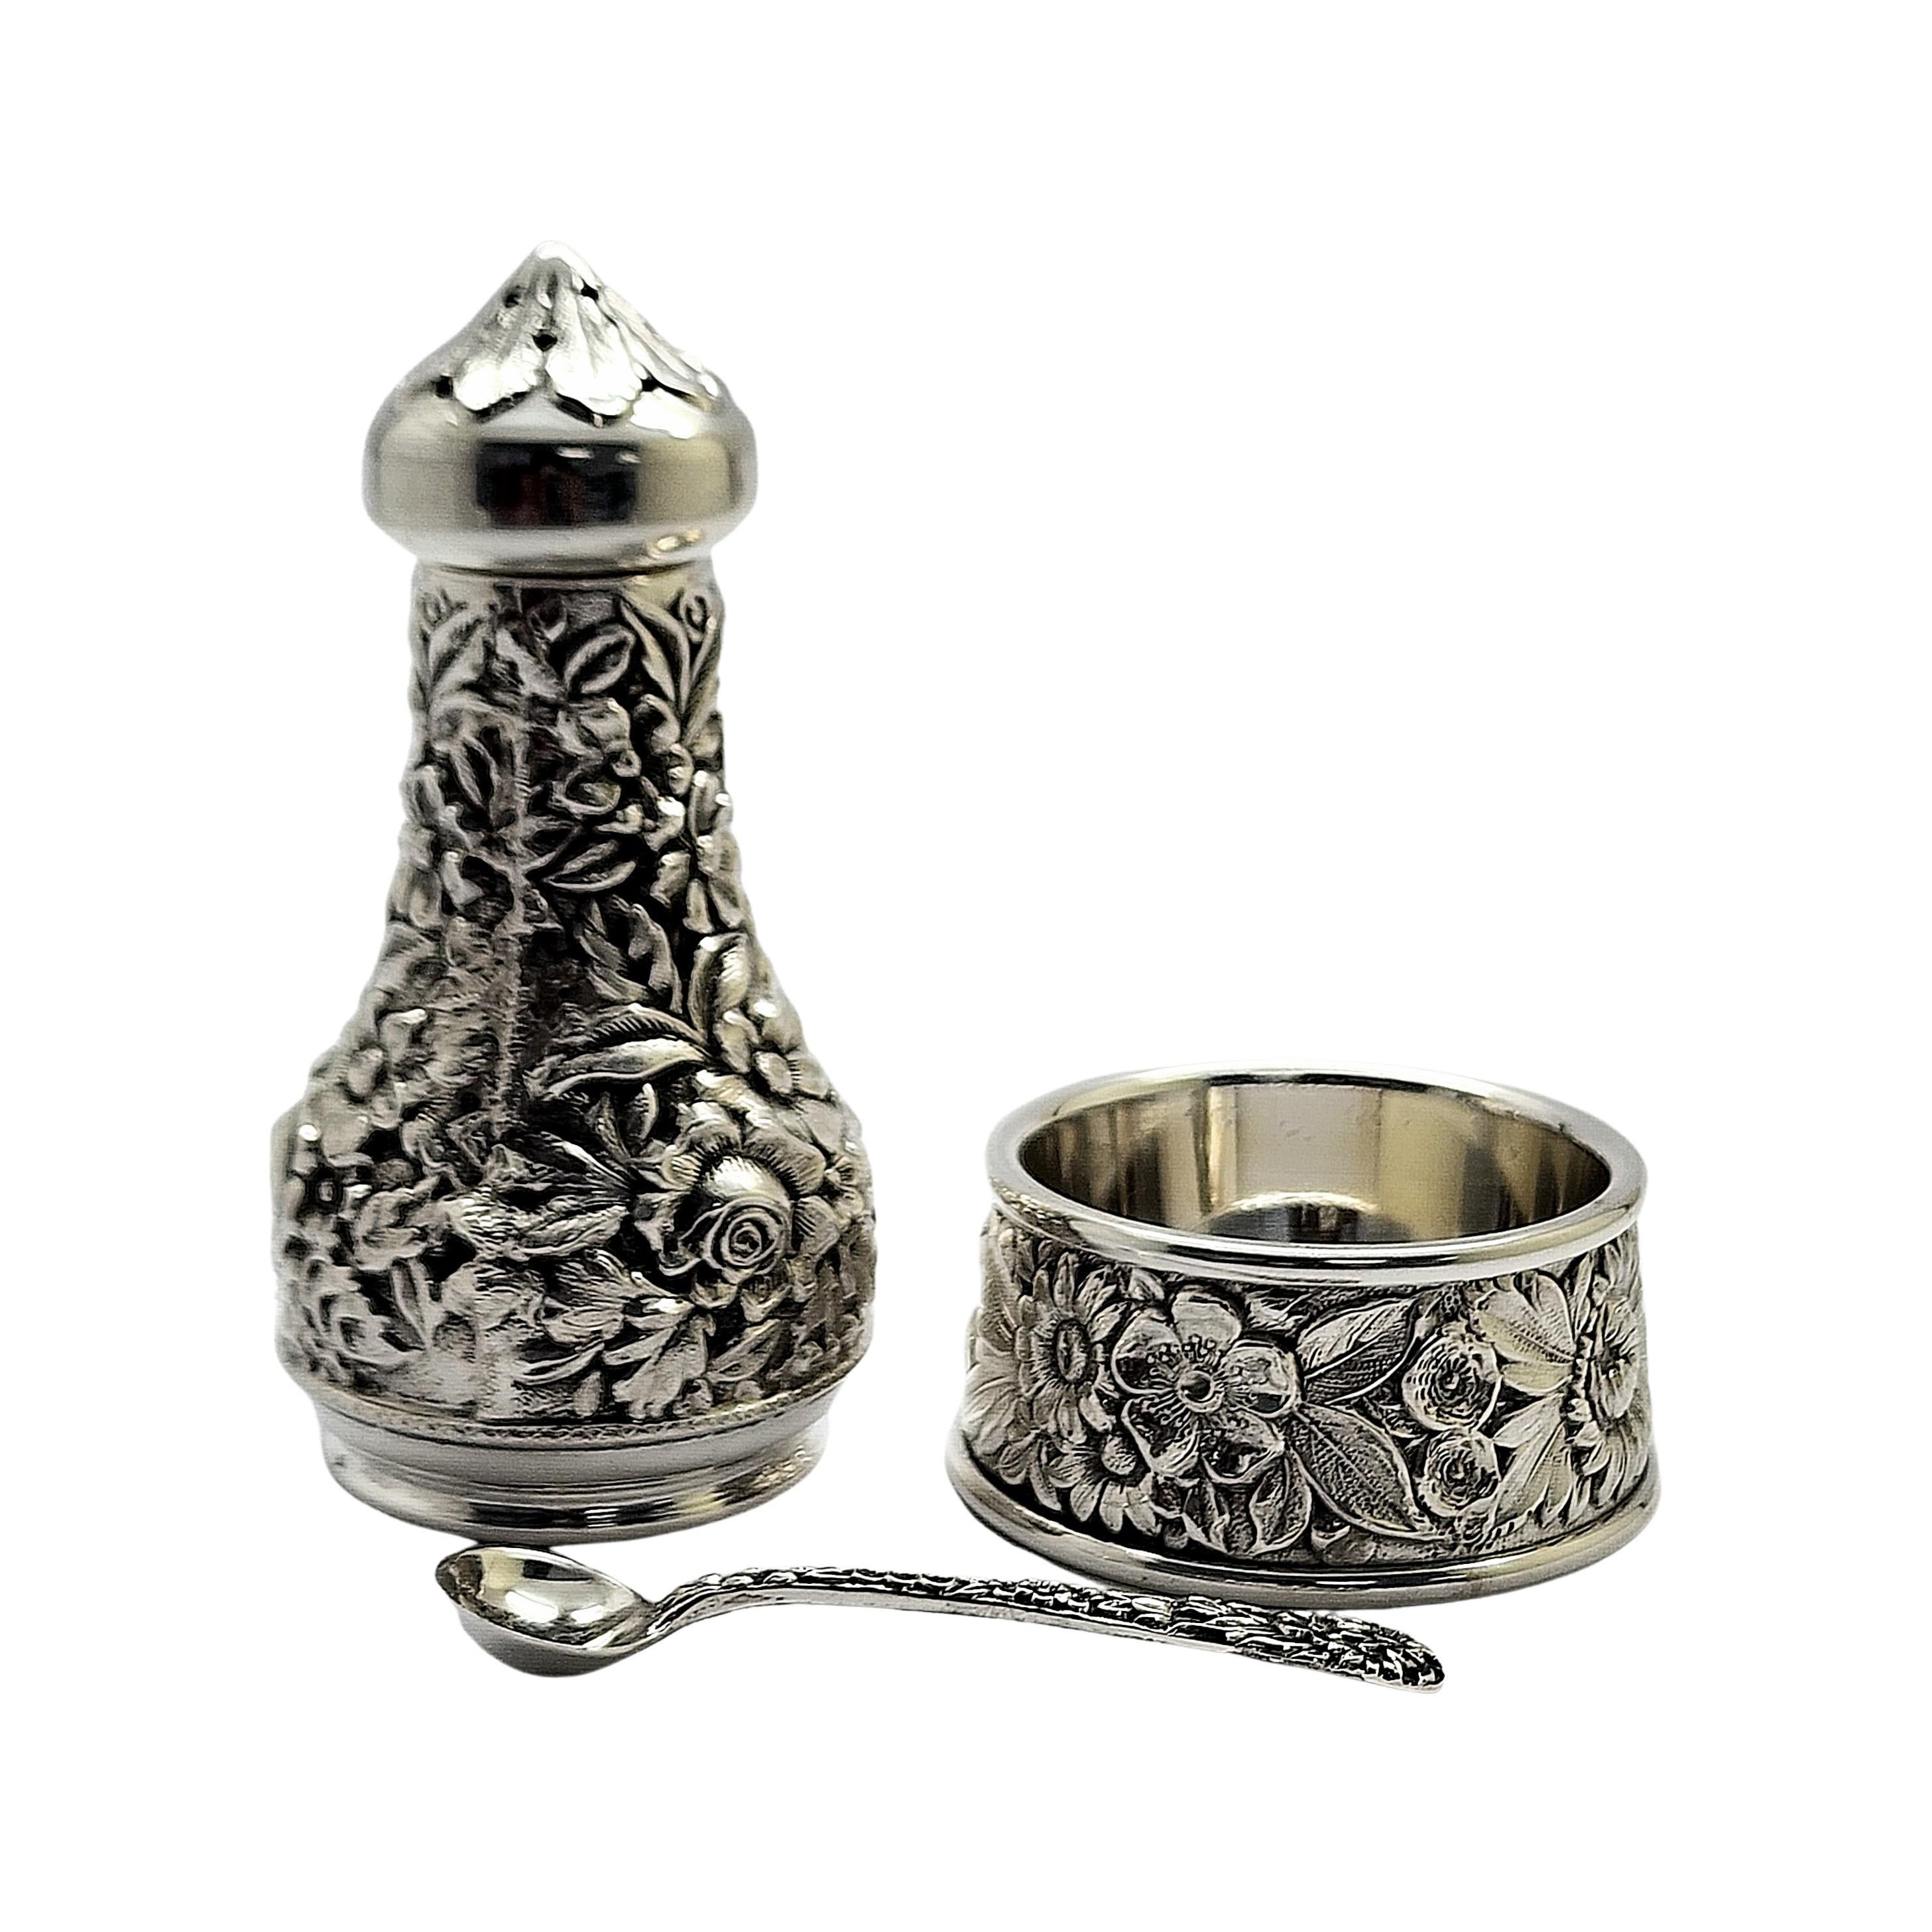 S Kirk & Son Sterling 59A Repousse Salt Cellar with Spoon and Pepper Shaker 4